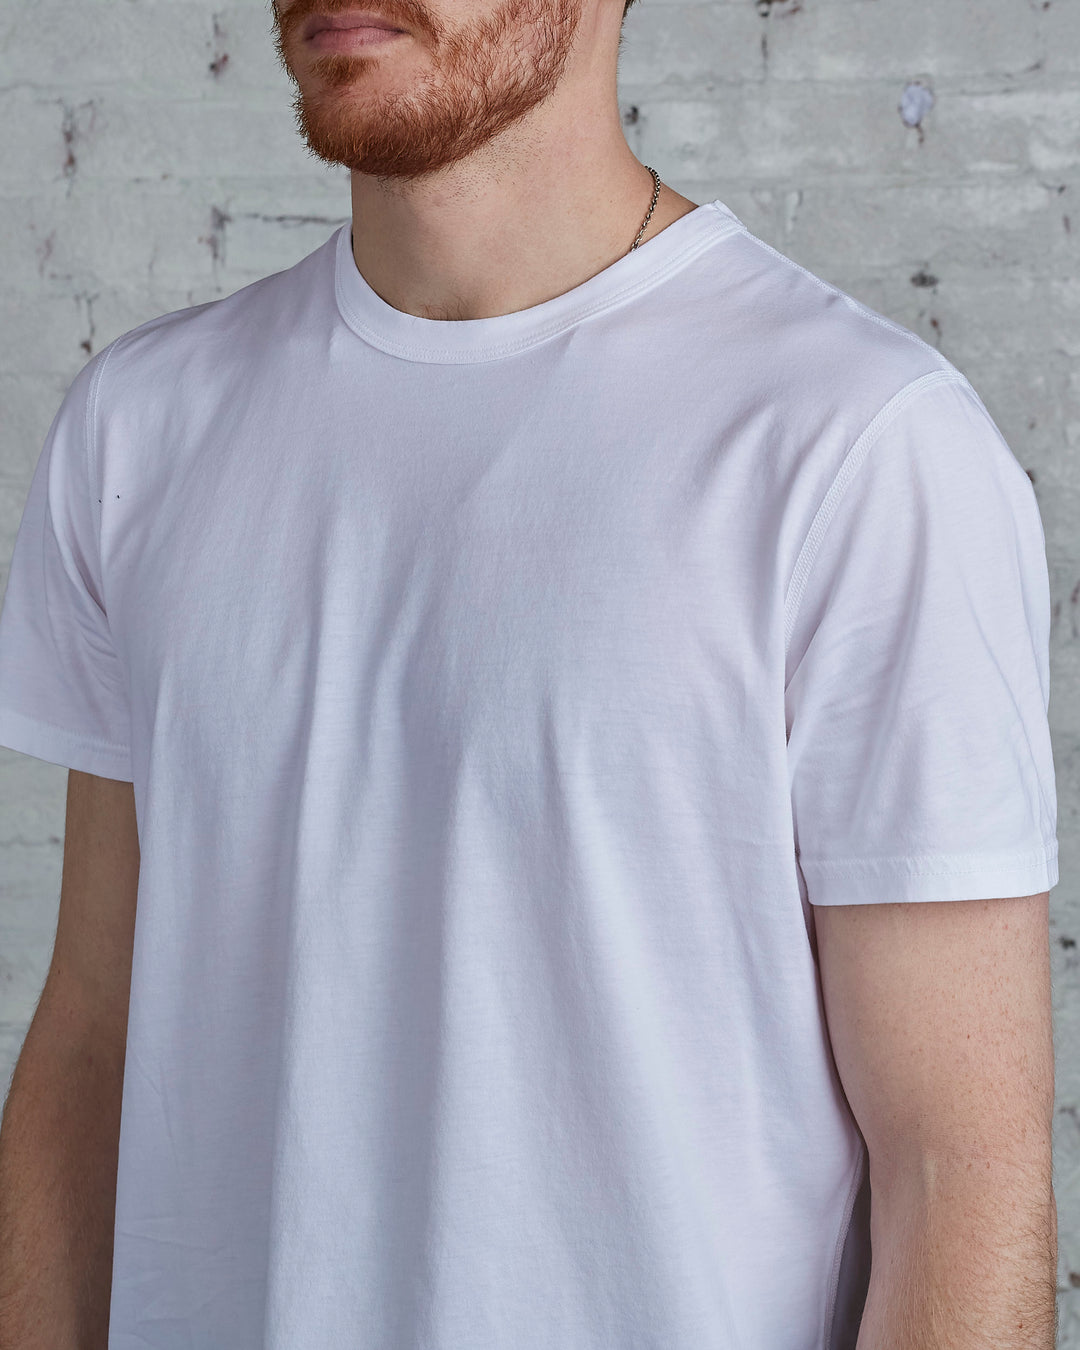 Reigning Champ 2-Pack T-Shirt White